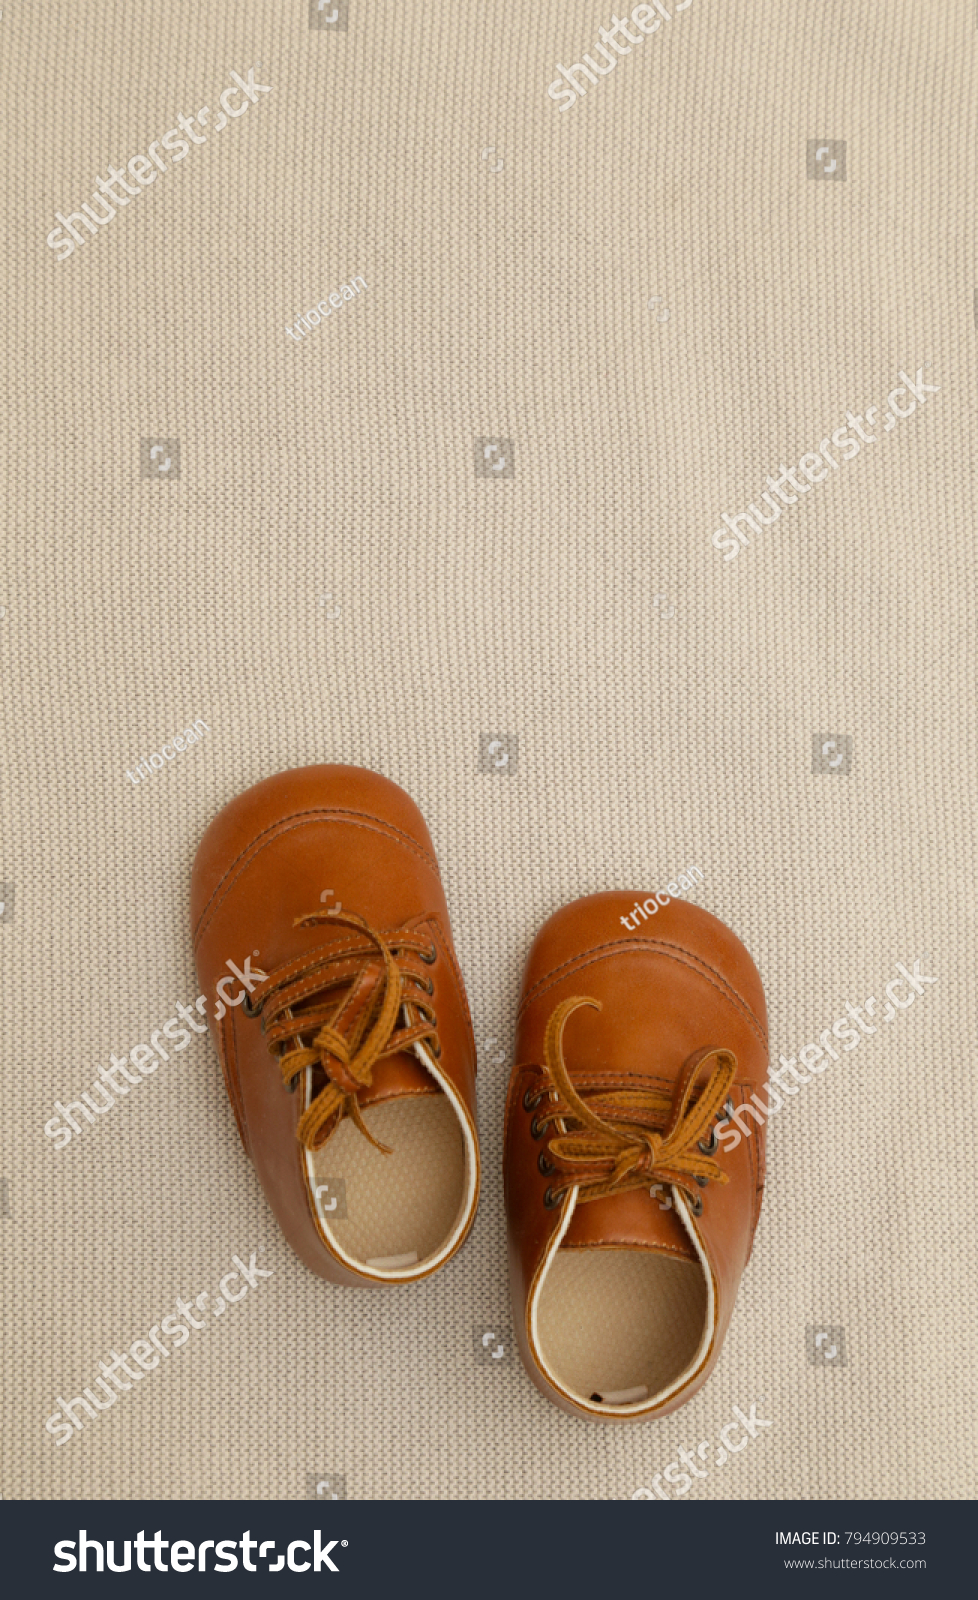 Brown leather baby shoes #794909533